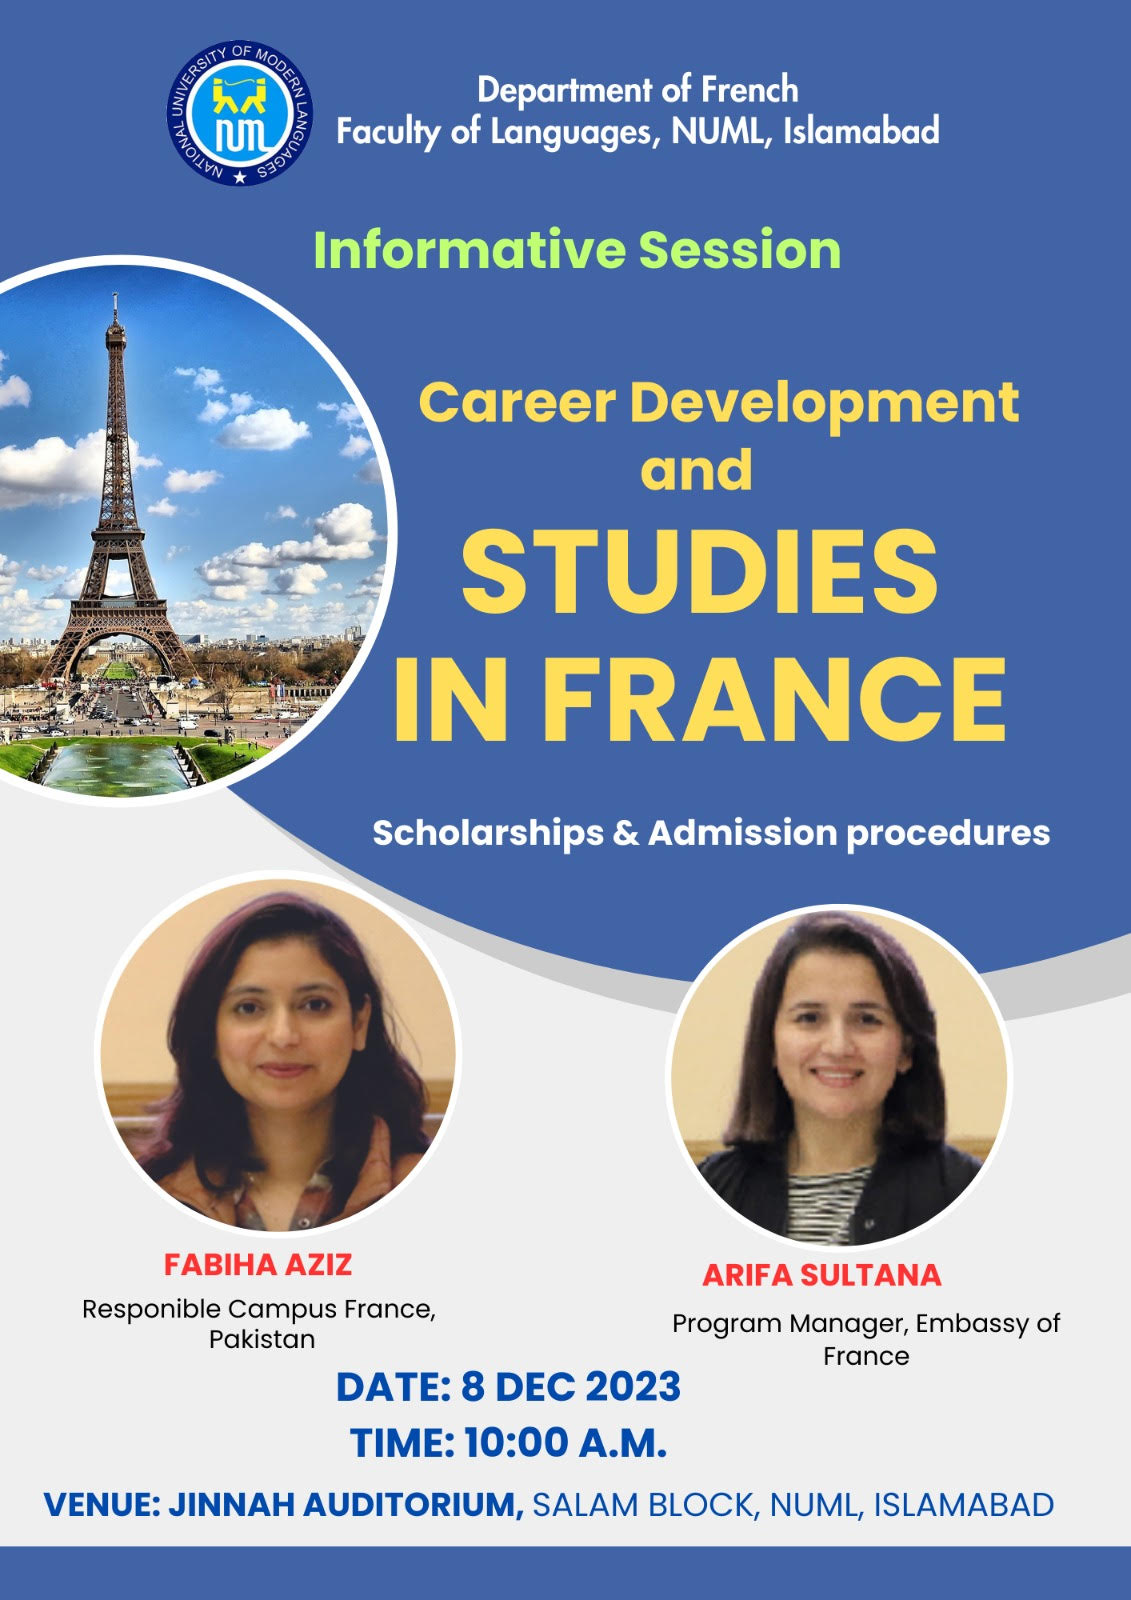 The Department of French cordially invites you to attend  the informative session on "Career Development and Studies in France".